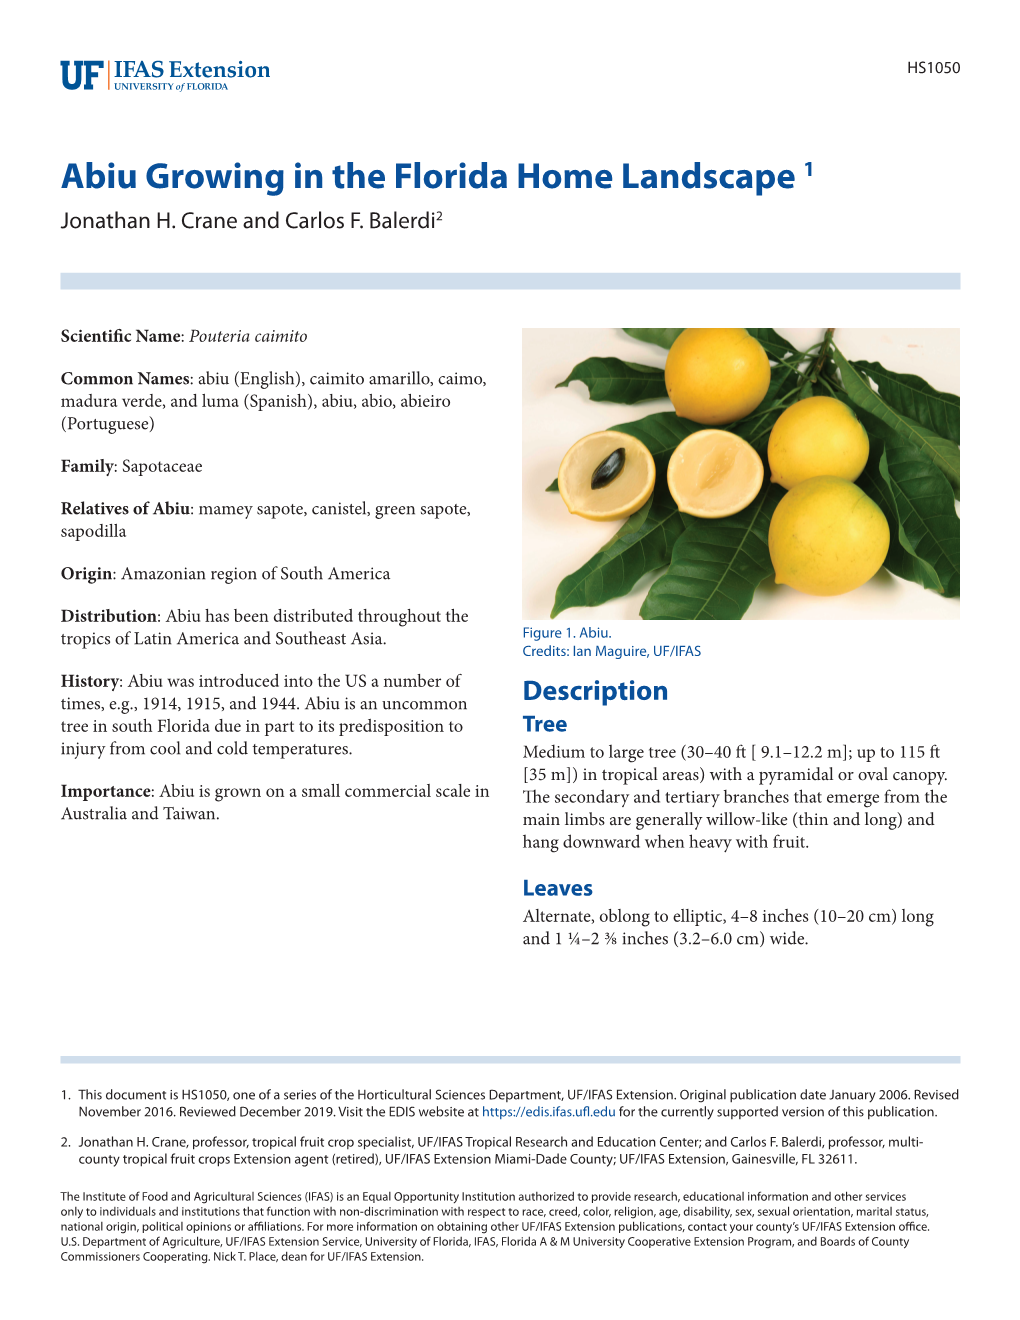 Abiu Growing in the Florida Home Landscape 1 Jonathan H